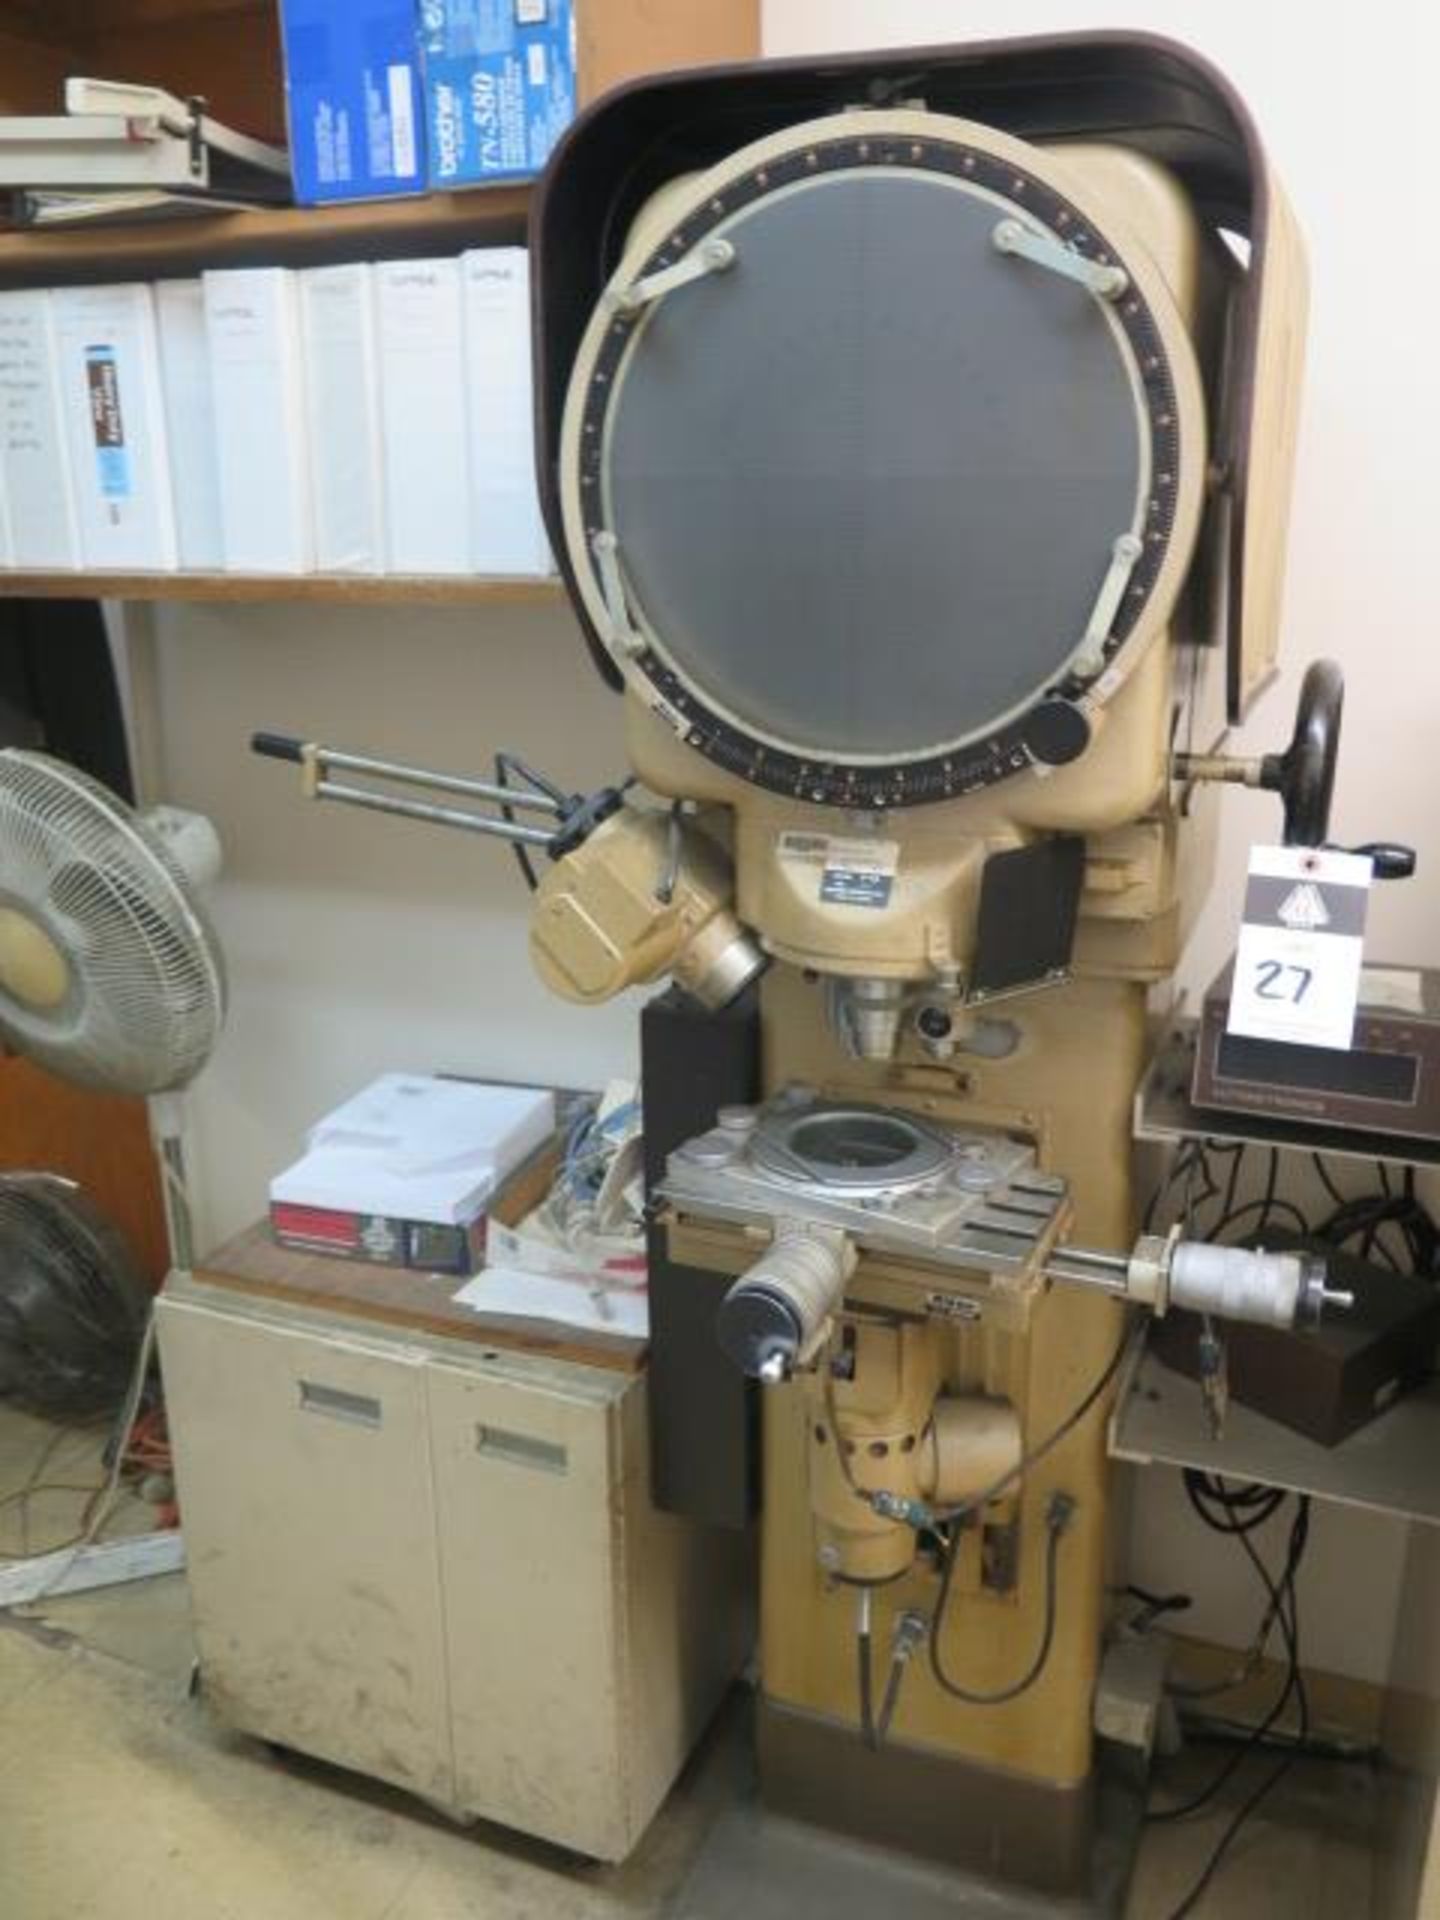 Nikon mdl. V-14 14" Optical Comparator s/n 36698 w/ Autometronics DRO, 20X, 50X and 300X, SOLD AS IS